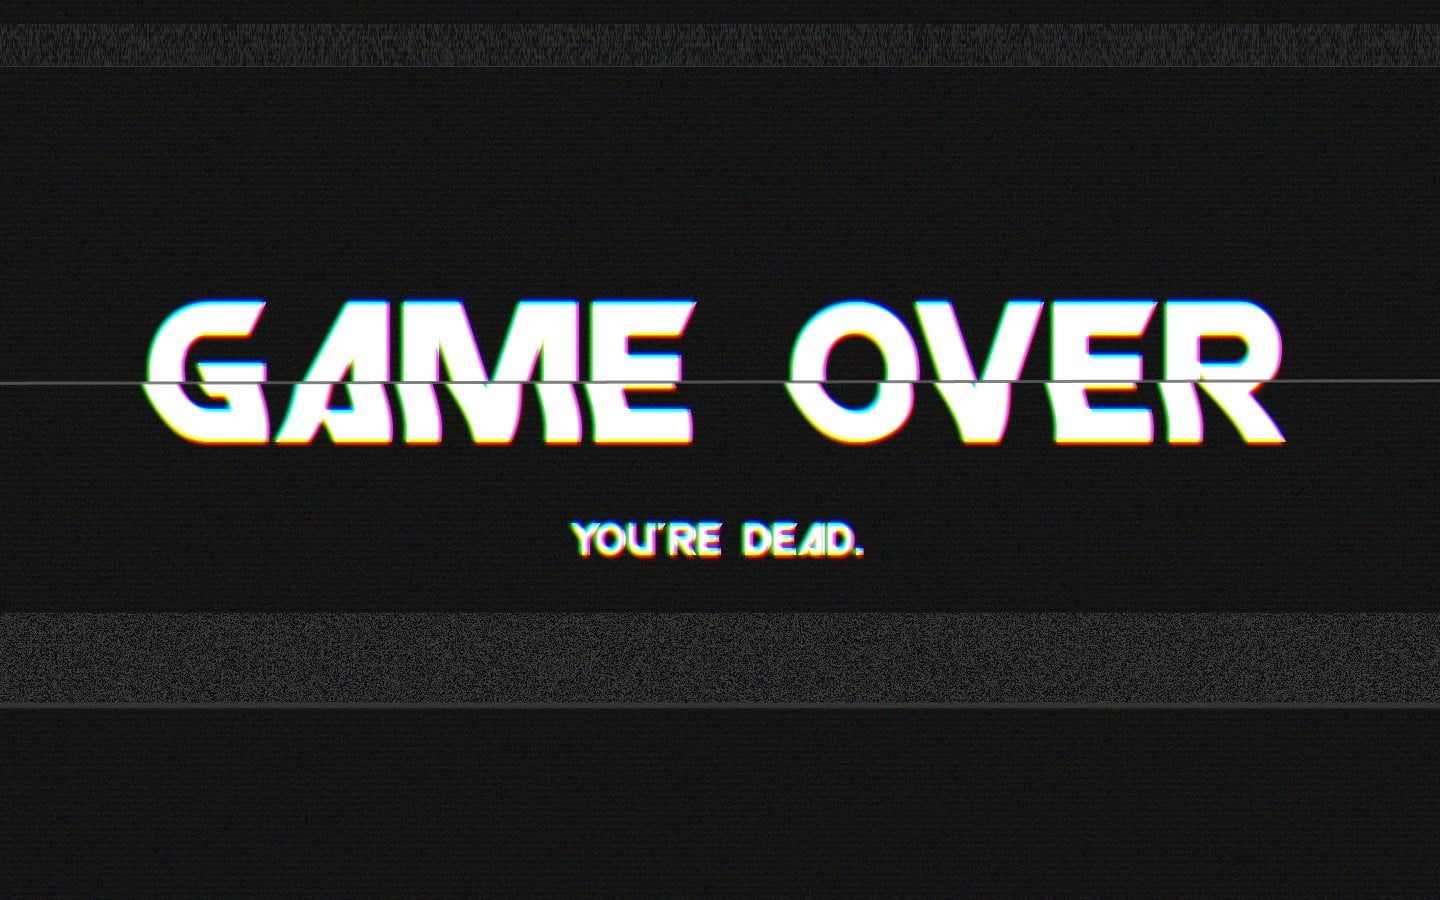 Wallpaper Game Over You're Dead text overlay, video games, glitch art, western script